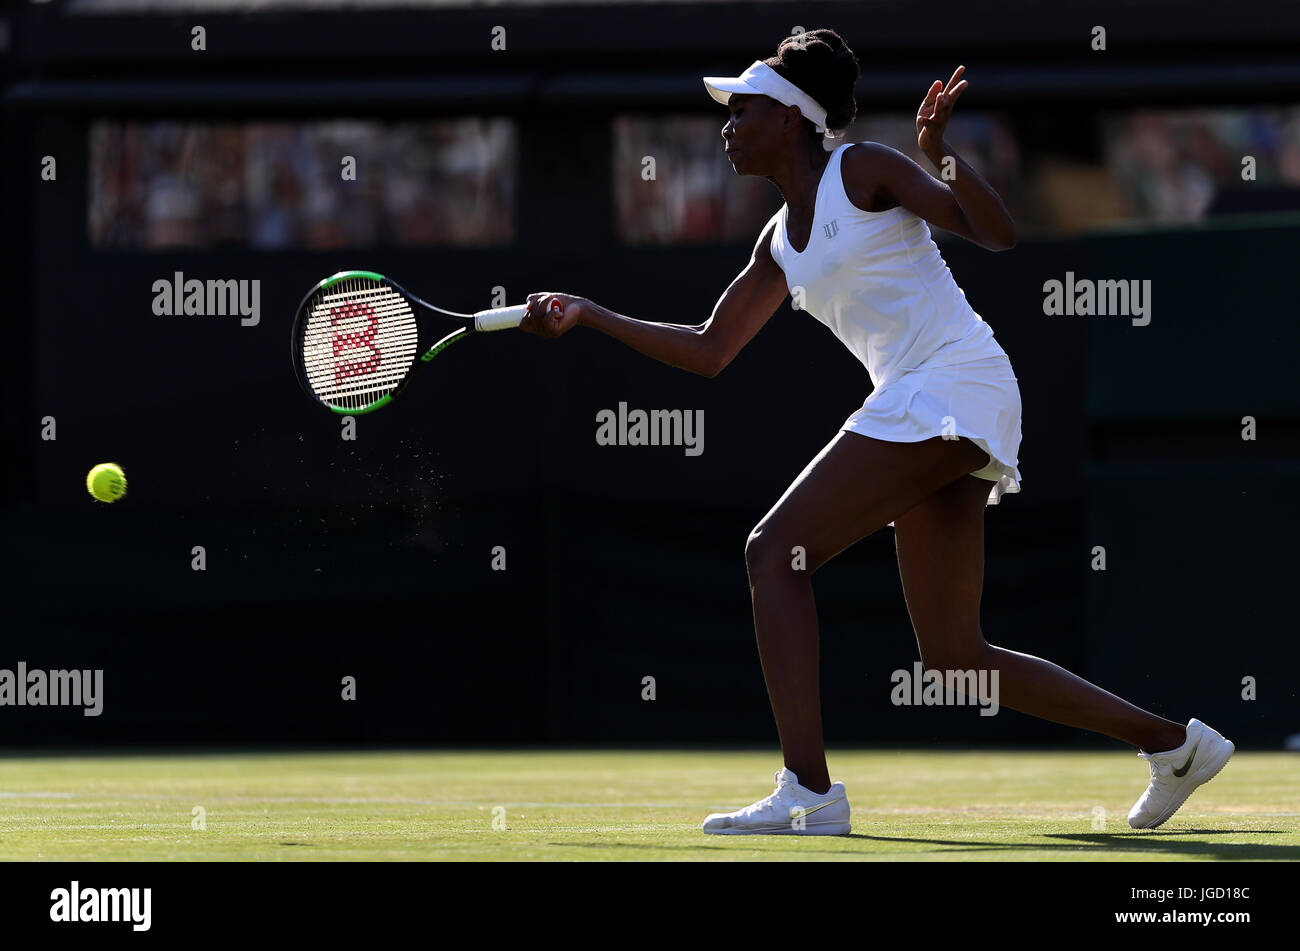 Venus Williams in action against Qiang Wang on day three of the Wimbledon Championships at The All England Lawn Tennis and Croquet Club, Wimbledon. Stock Photo